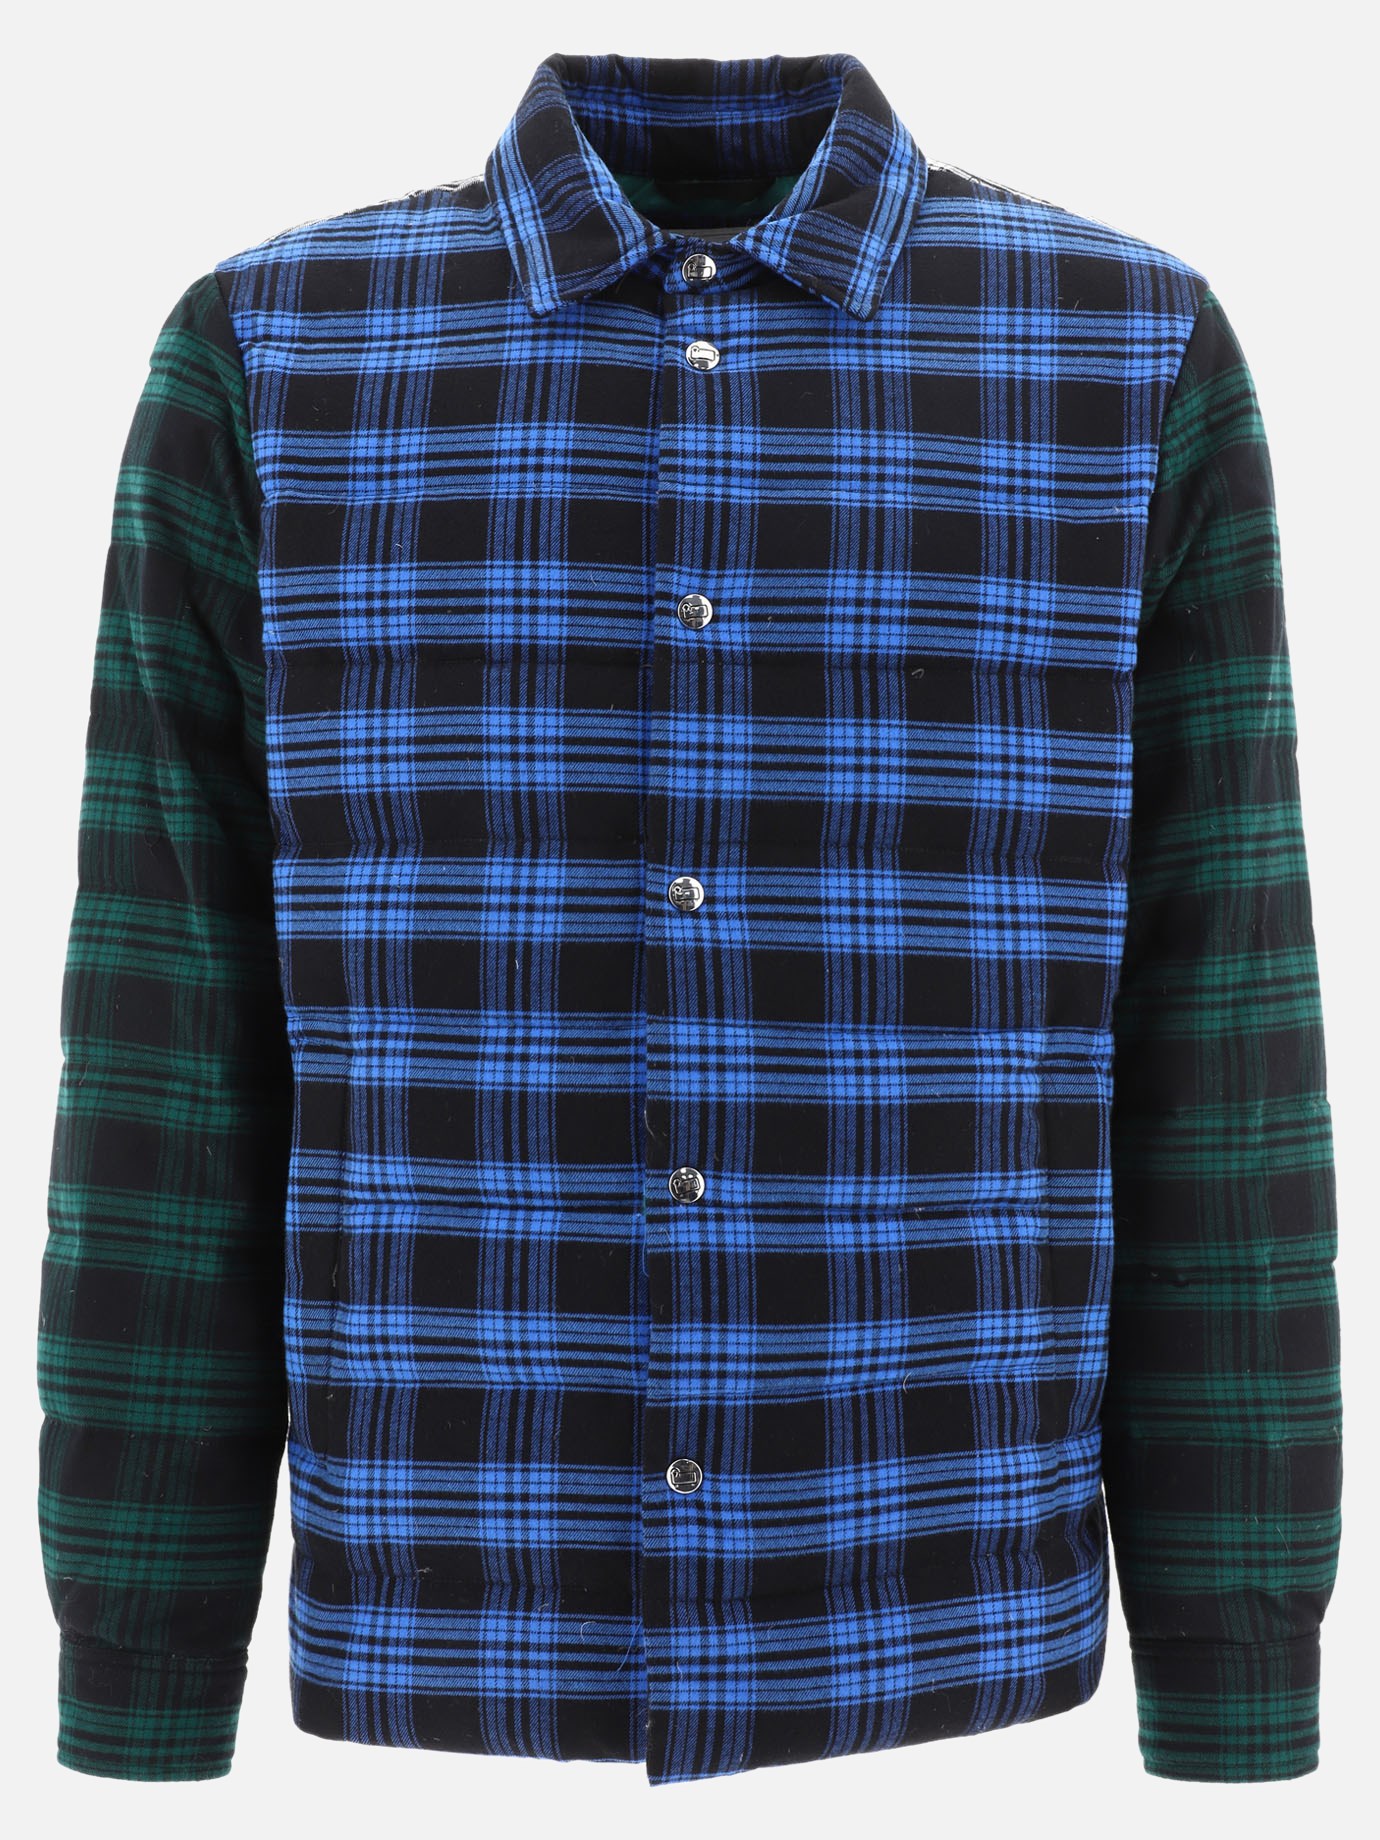 Overshirt  Check by Woolrich - 3